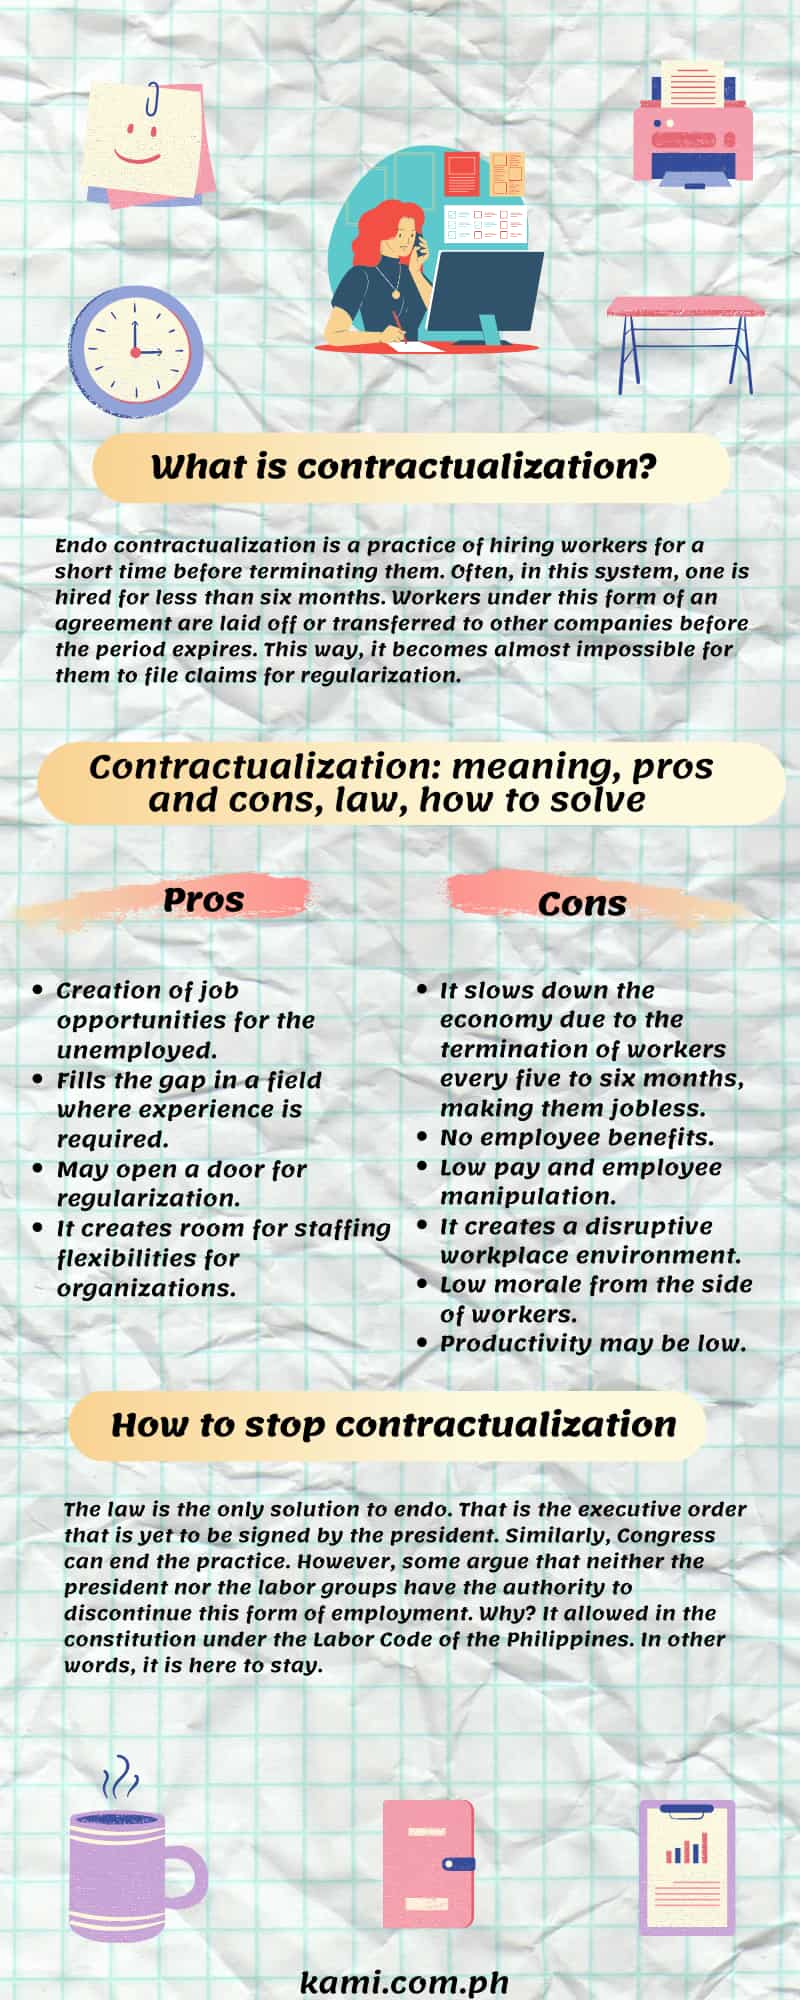 Contractualization: meaning, pros and cons, law, how to solve (2020)